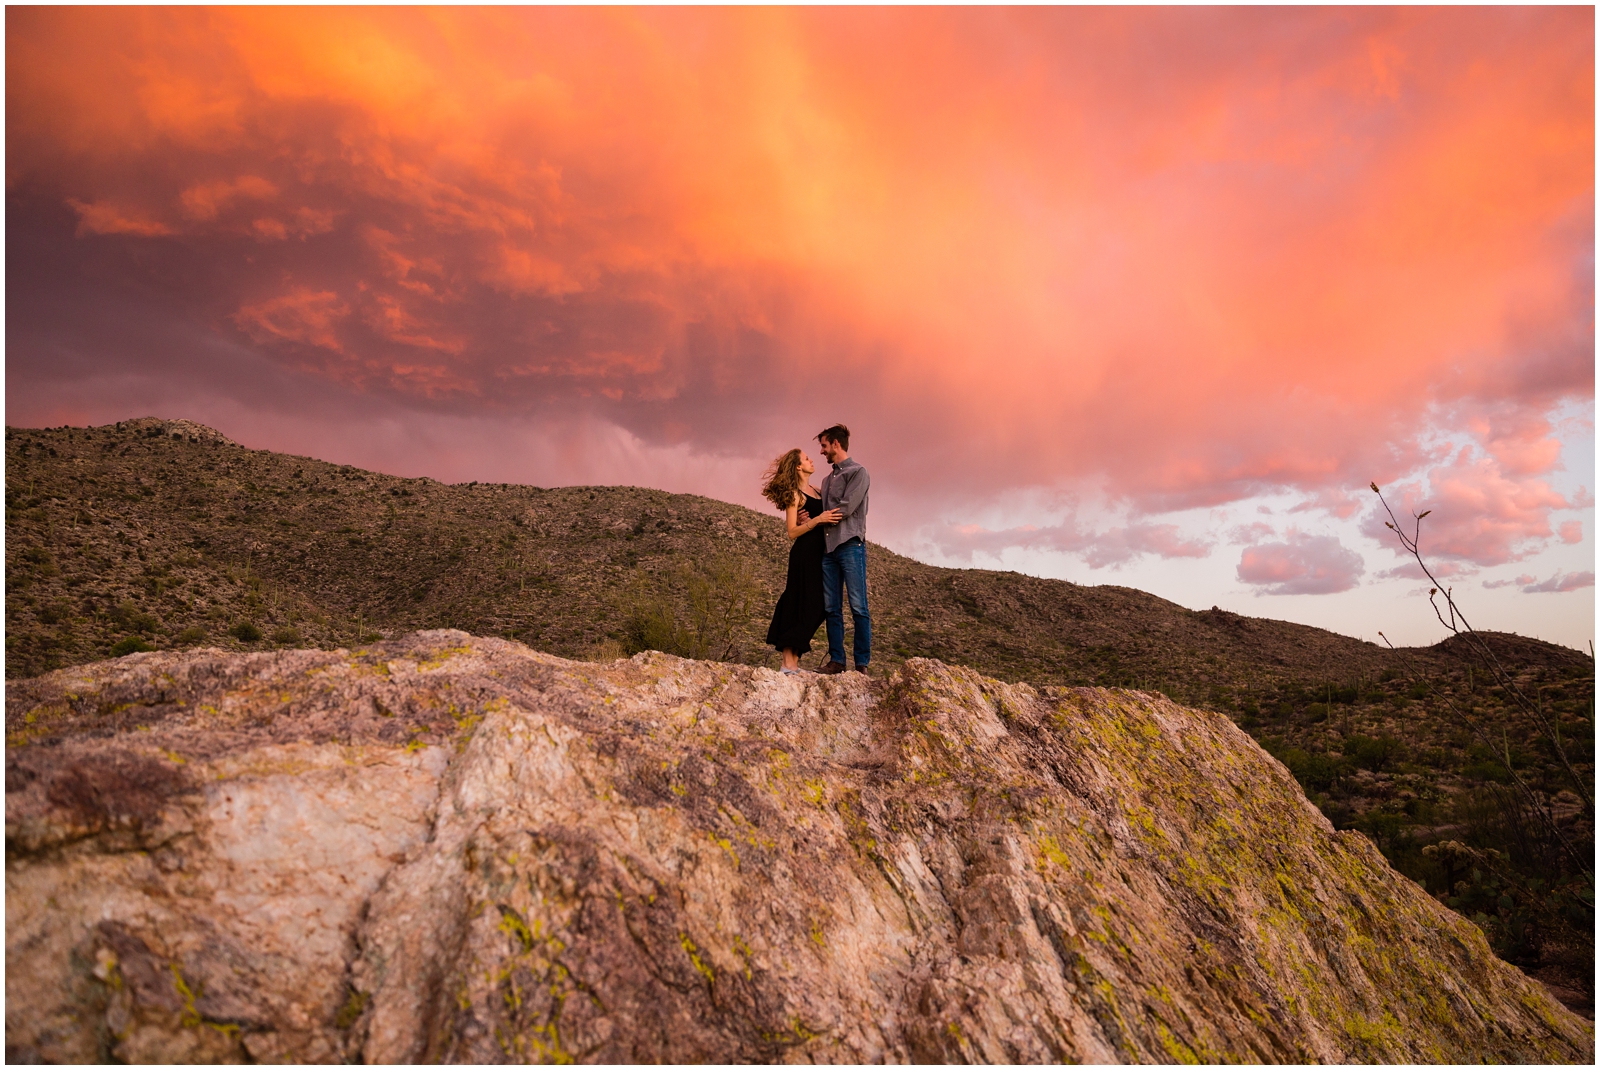 A super colorful sunset happening behind this couple getting their photos taken in Saguaro National Park by Clarissa of Clarissa Wylde Photography